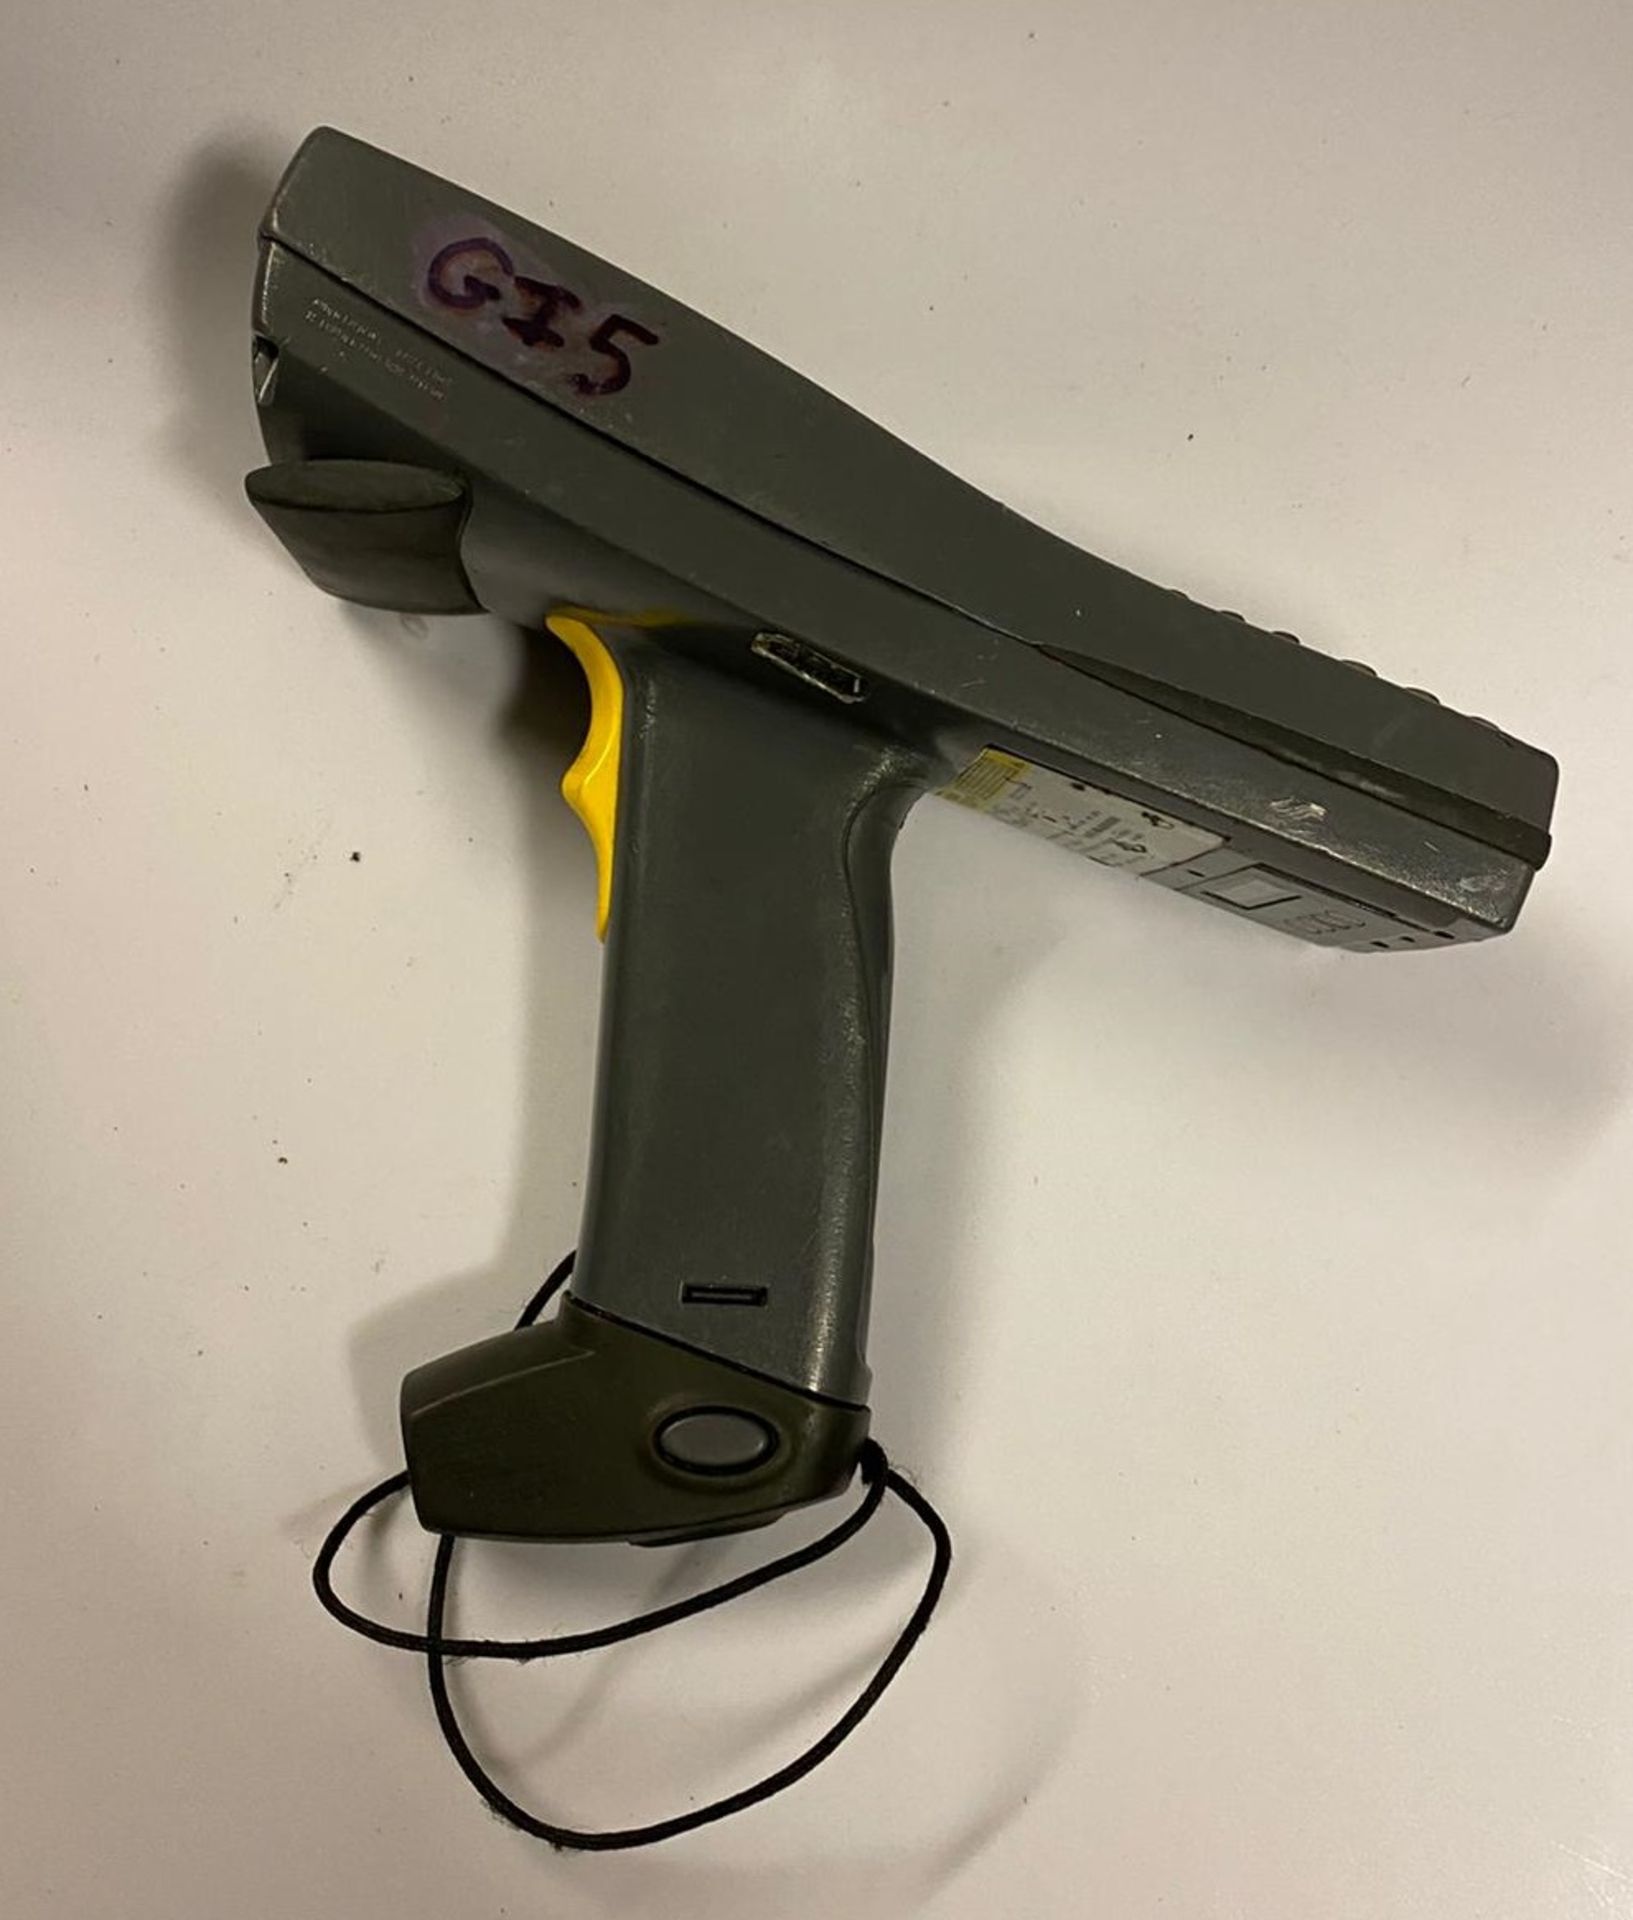 13 x Symbol PDT-6840 Barcode Scanners - CL011 -  Ref MS158 WH2 - Location: Altrincham WA14 Pre-owned - Image 4 of 5